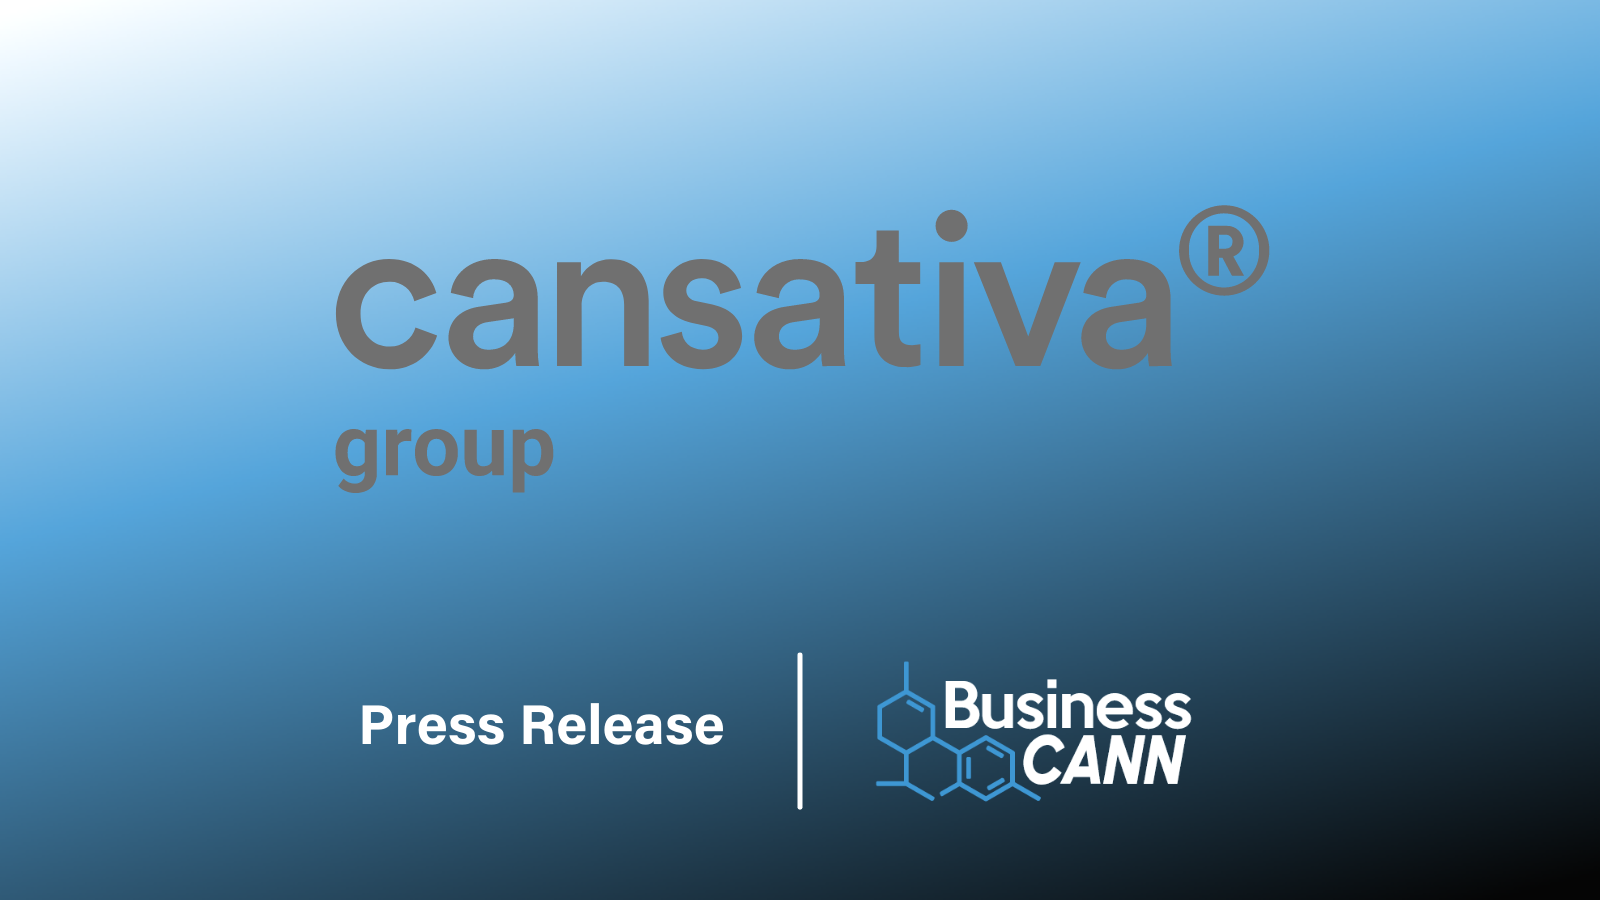 Cansativa Group announced today it has closed a $15M Series B investment. The funding round was led by Casa Verde with participation by Argonautic Ventures and Munich-based family office Alluti.